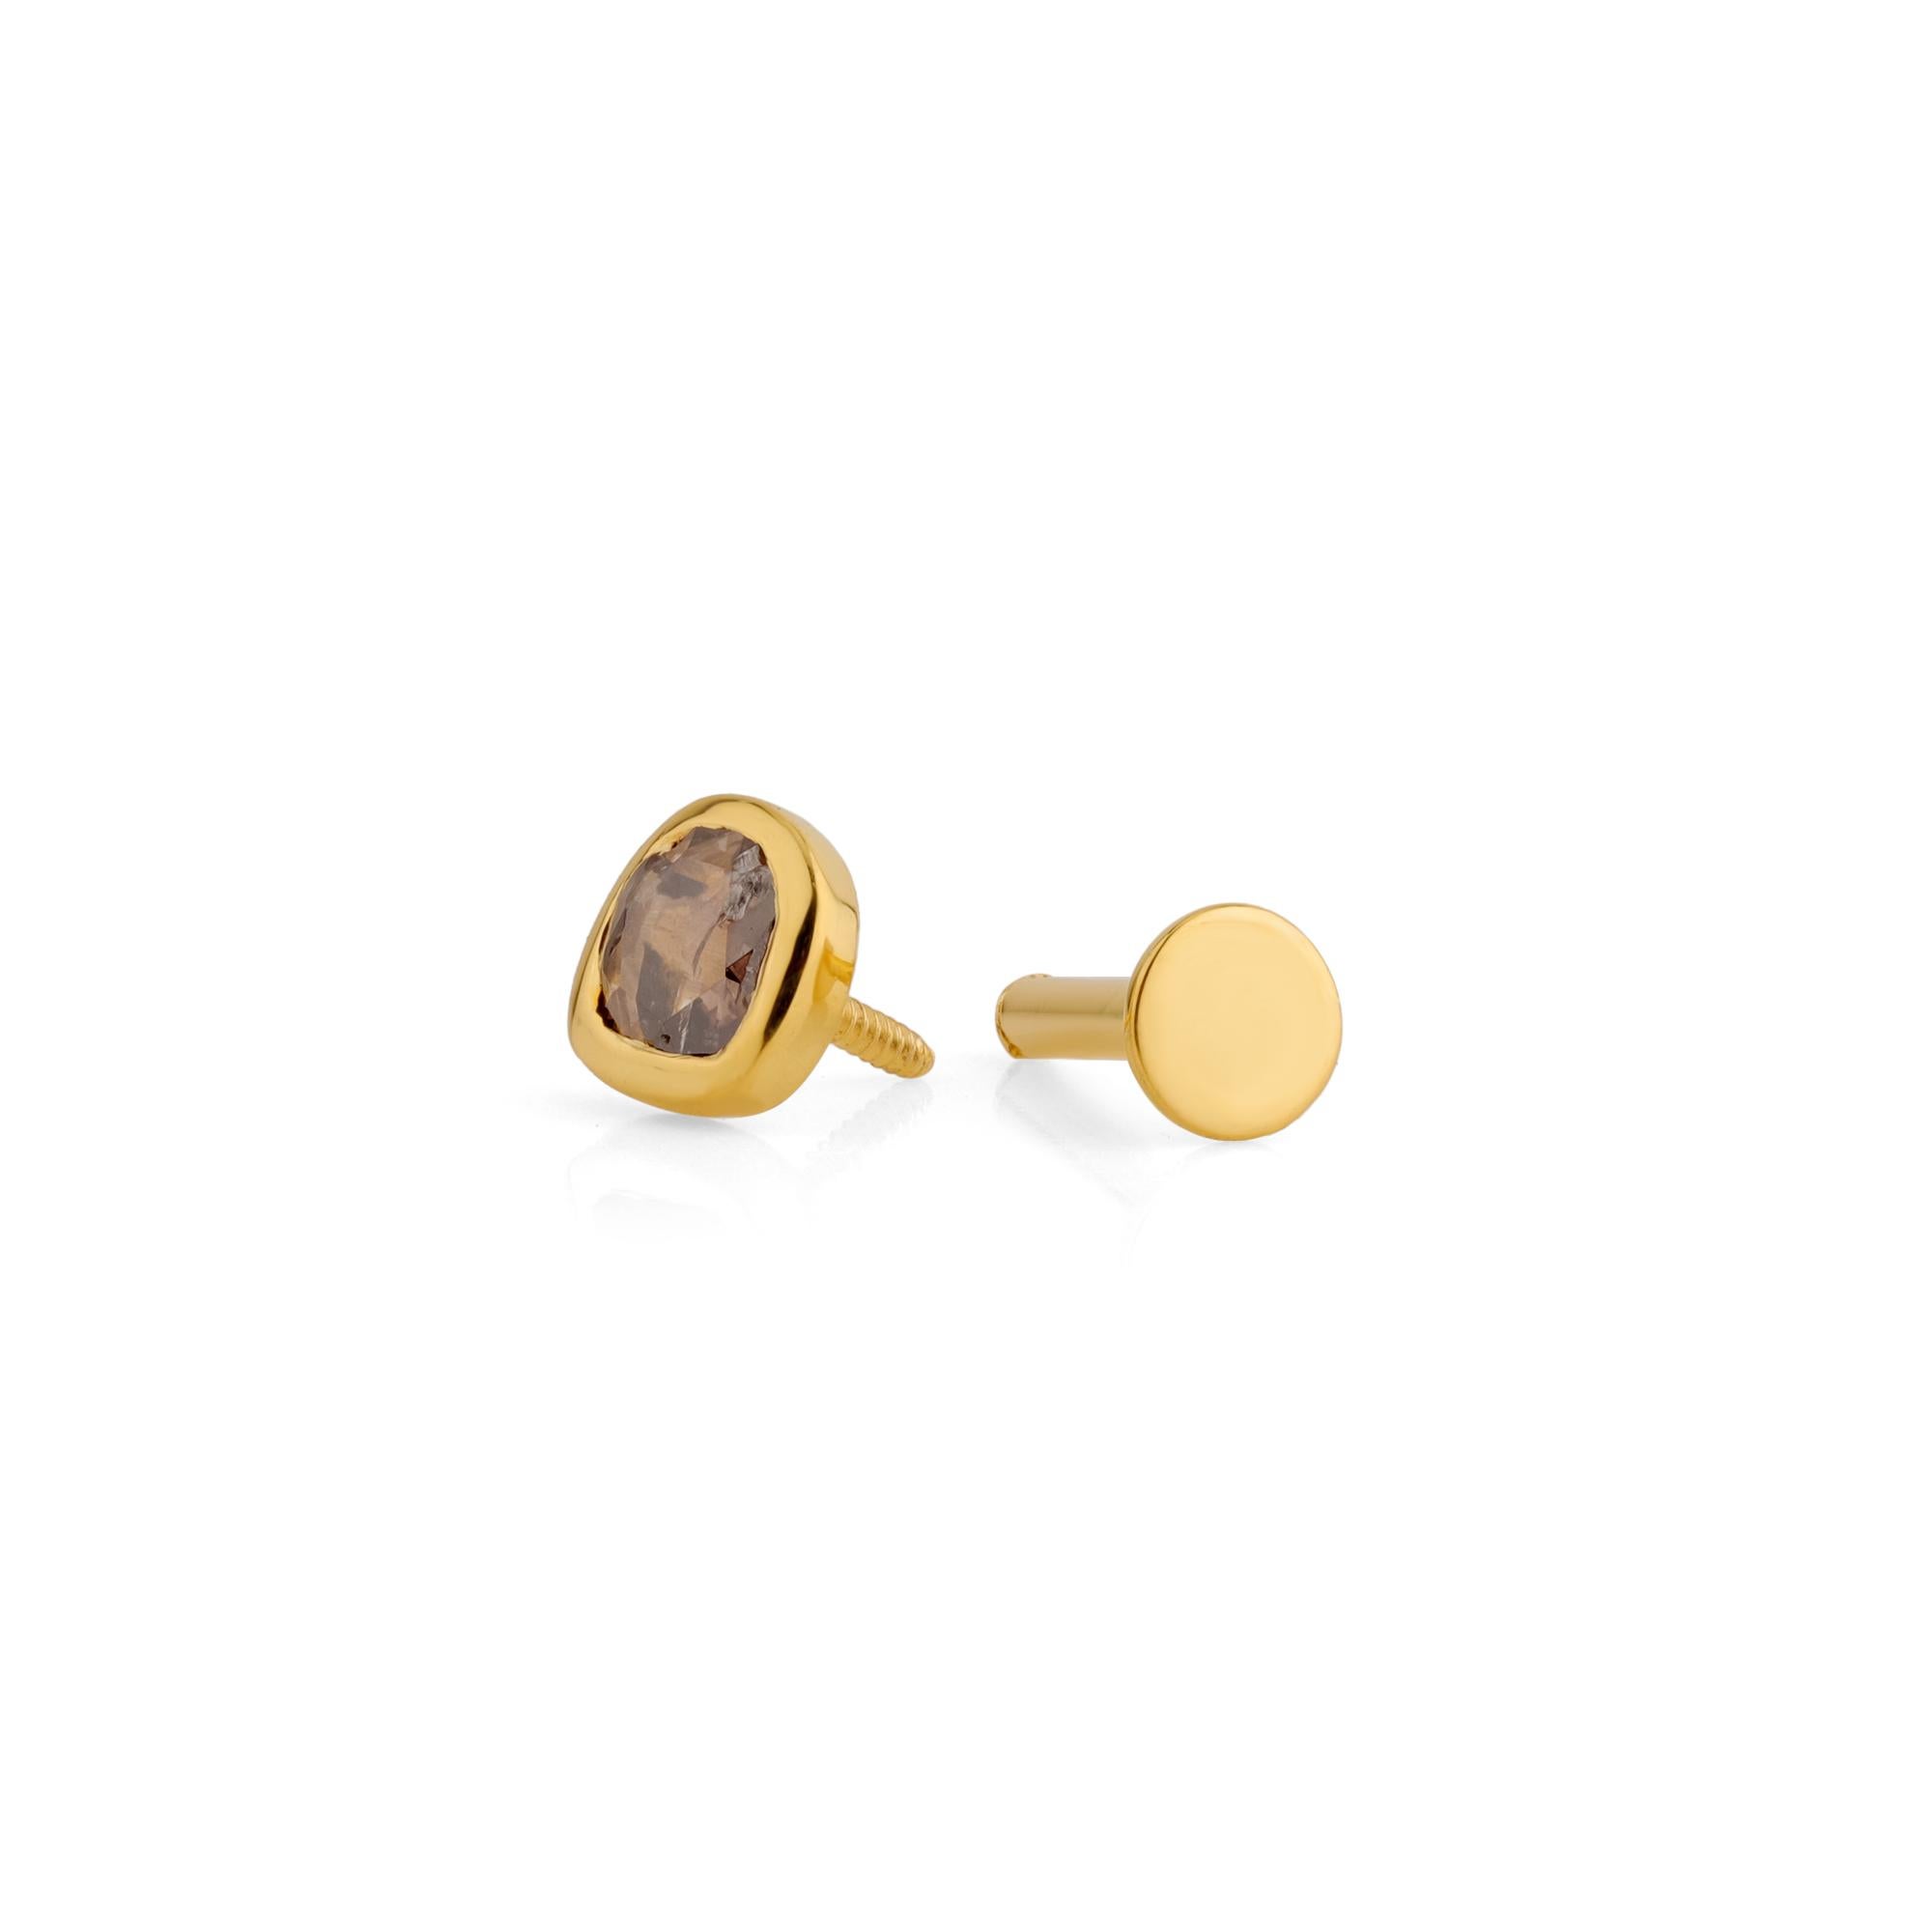 Step into a world of opulence and glamour with our extraordinary one-of-a-kind Gold-Plated Silver Piercing. This magnificent creation intertwines the richness of gold with the timeless allure of silver, resulting in a piece that exudes elegance and